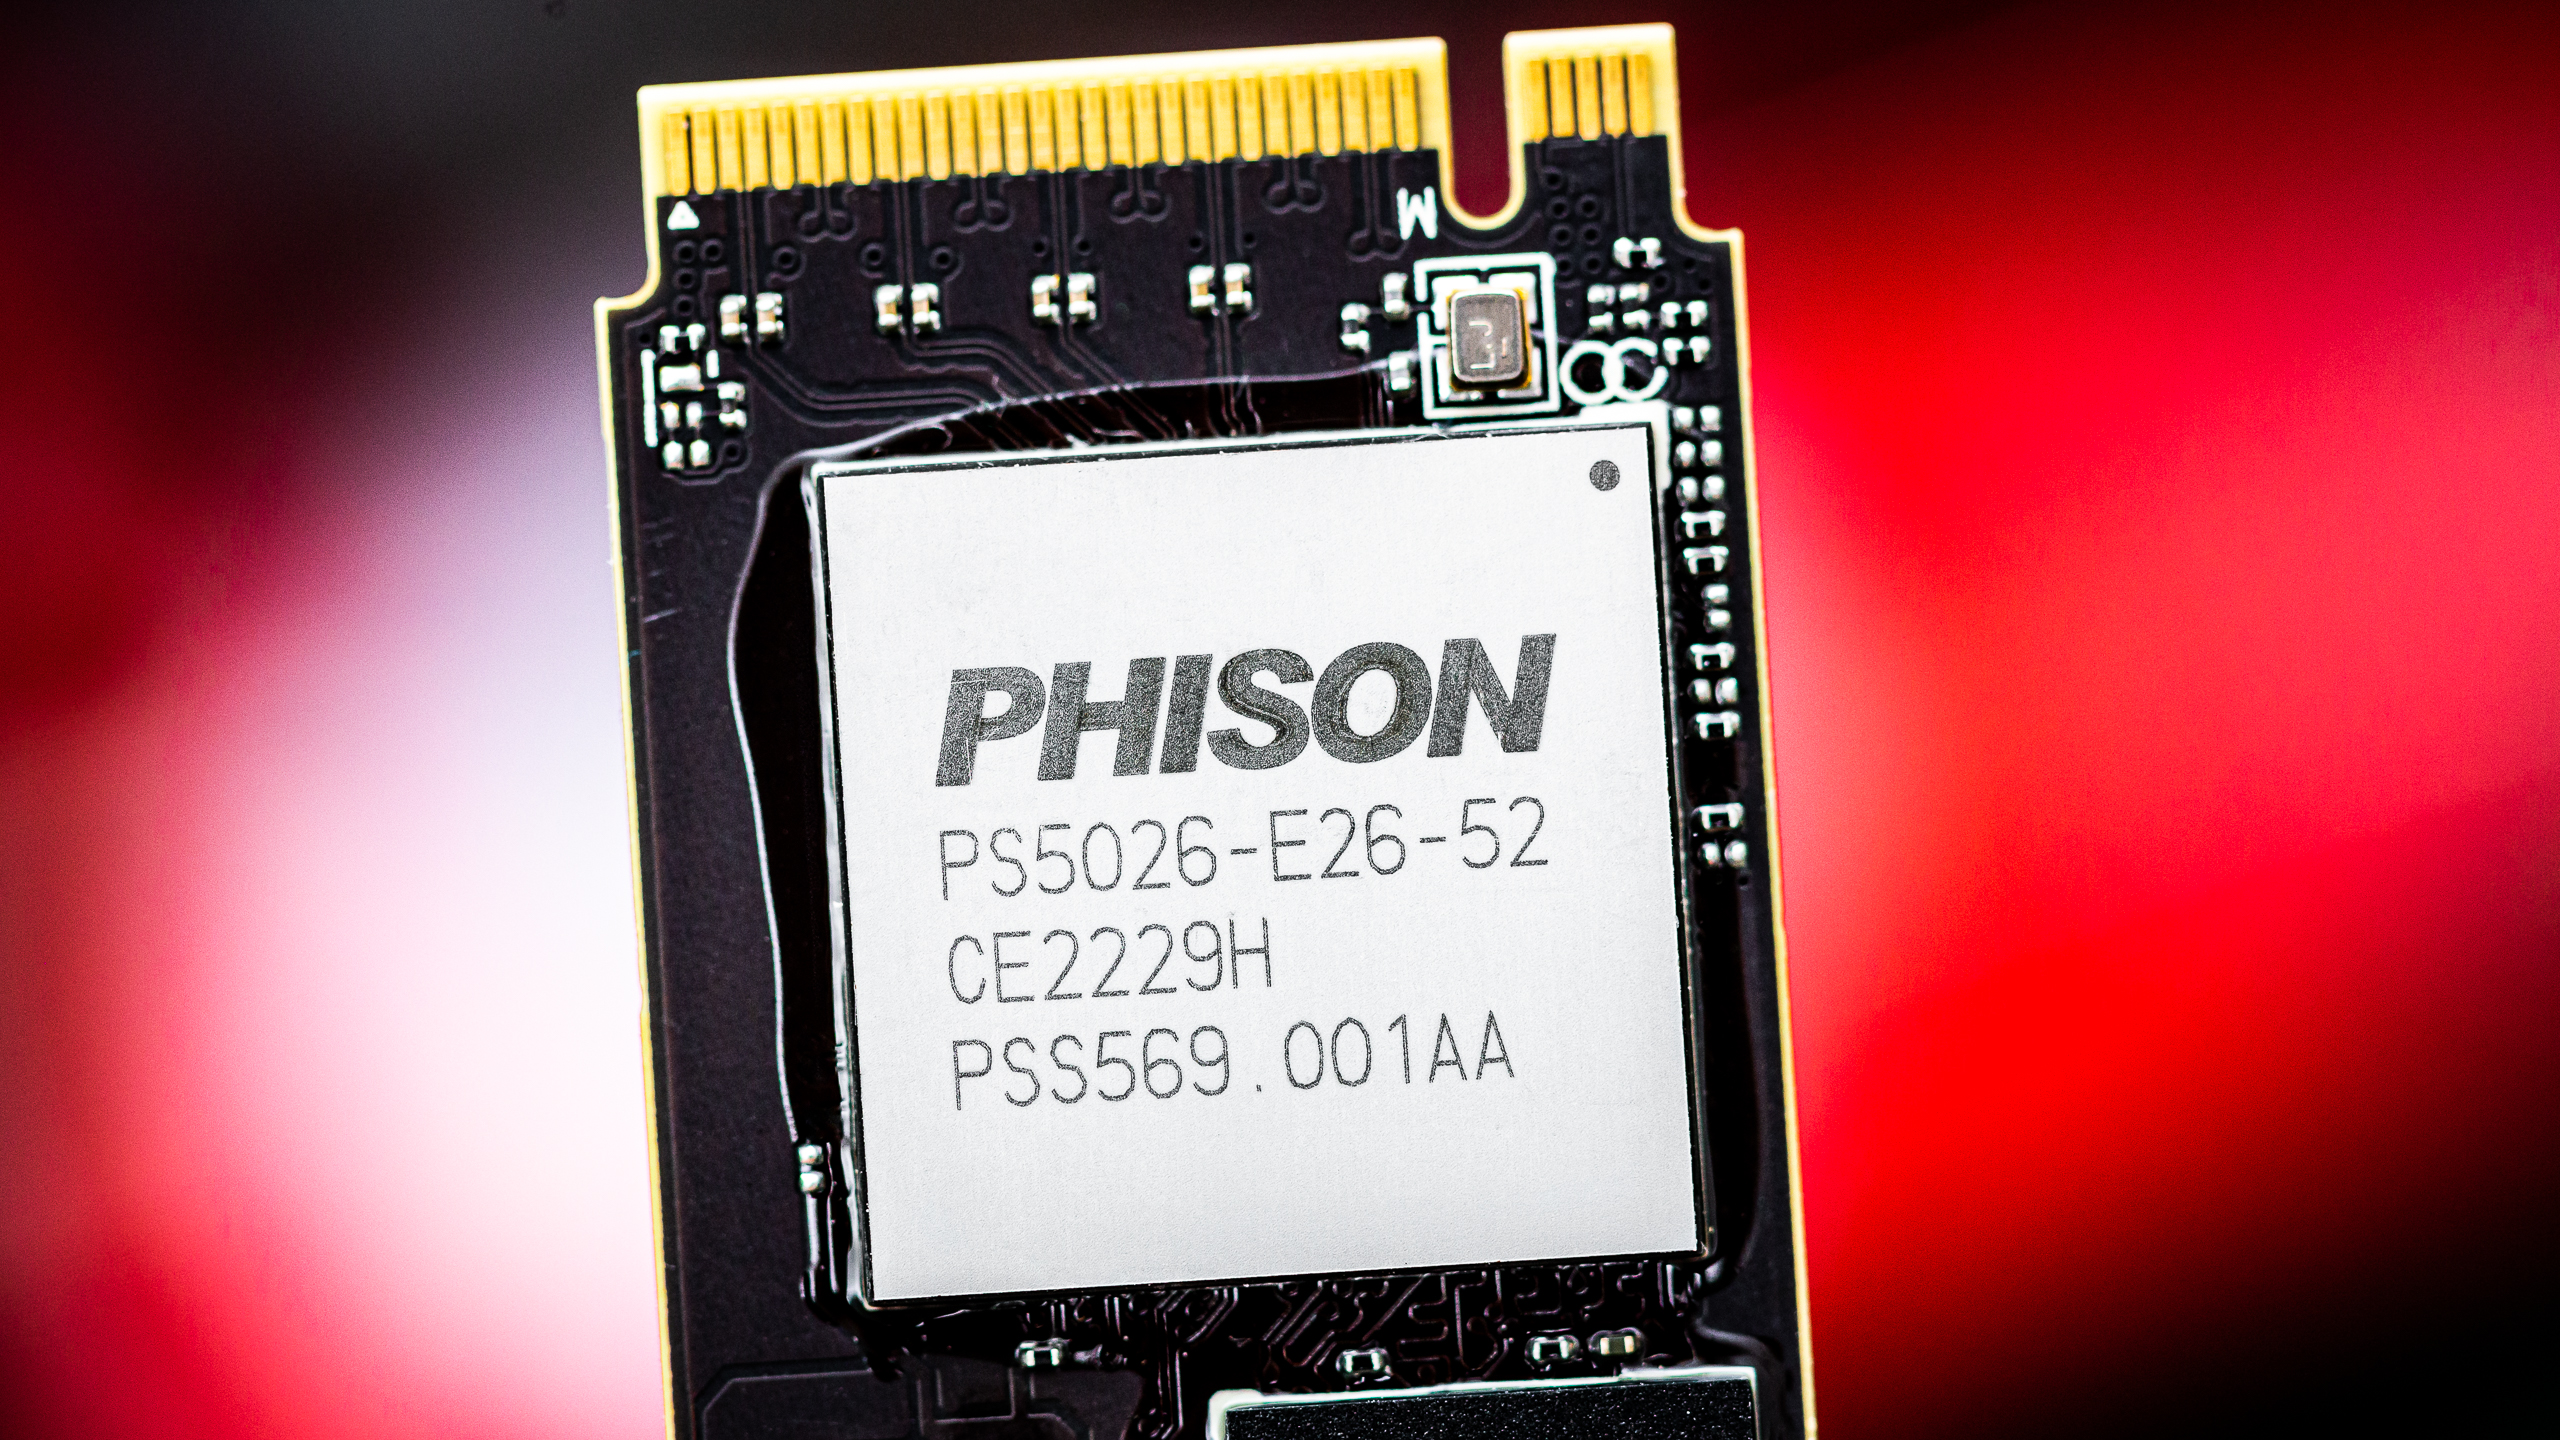 Phison CEO: PCIe Gen 5 SSDs Won't Take Off Until Late 2024